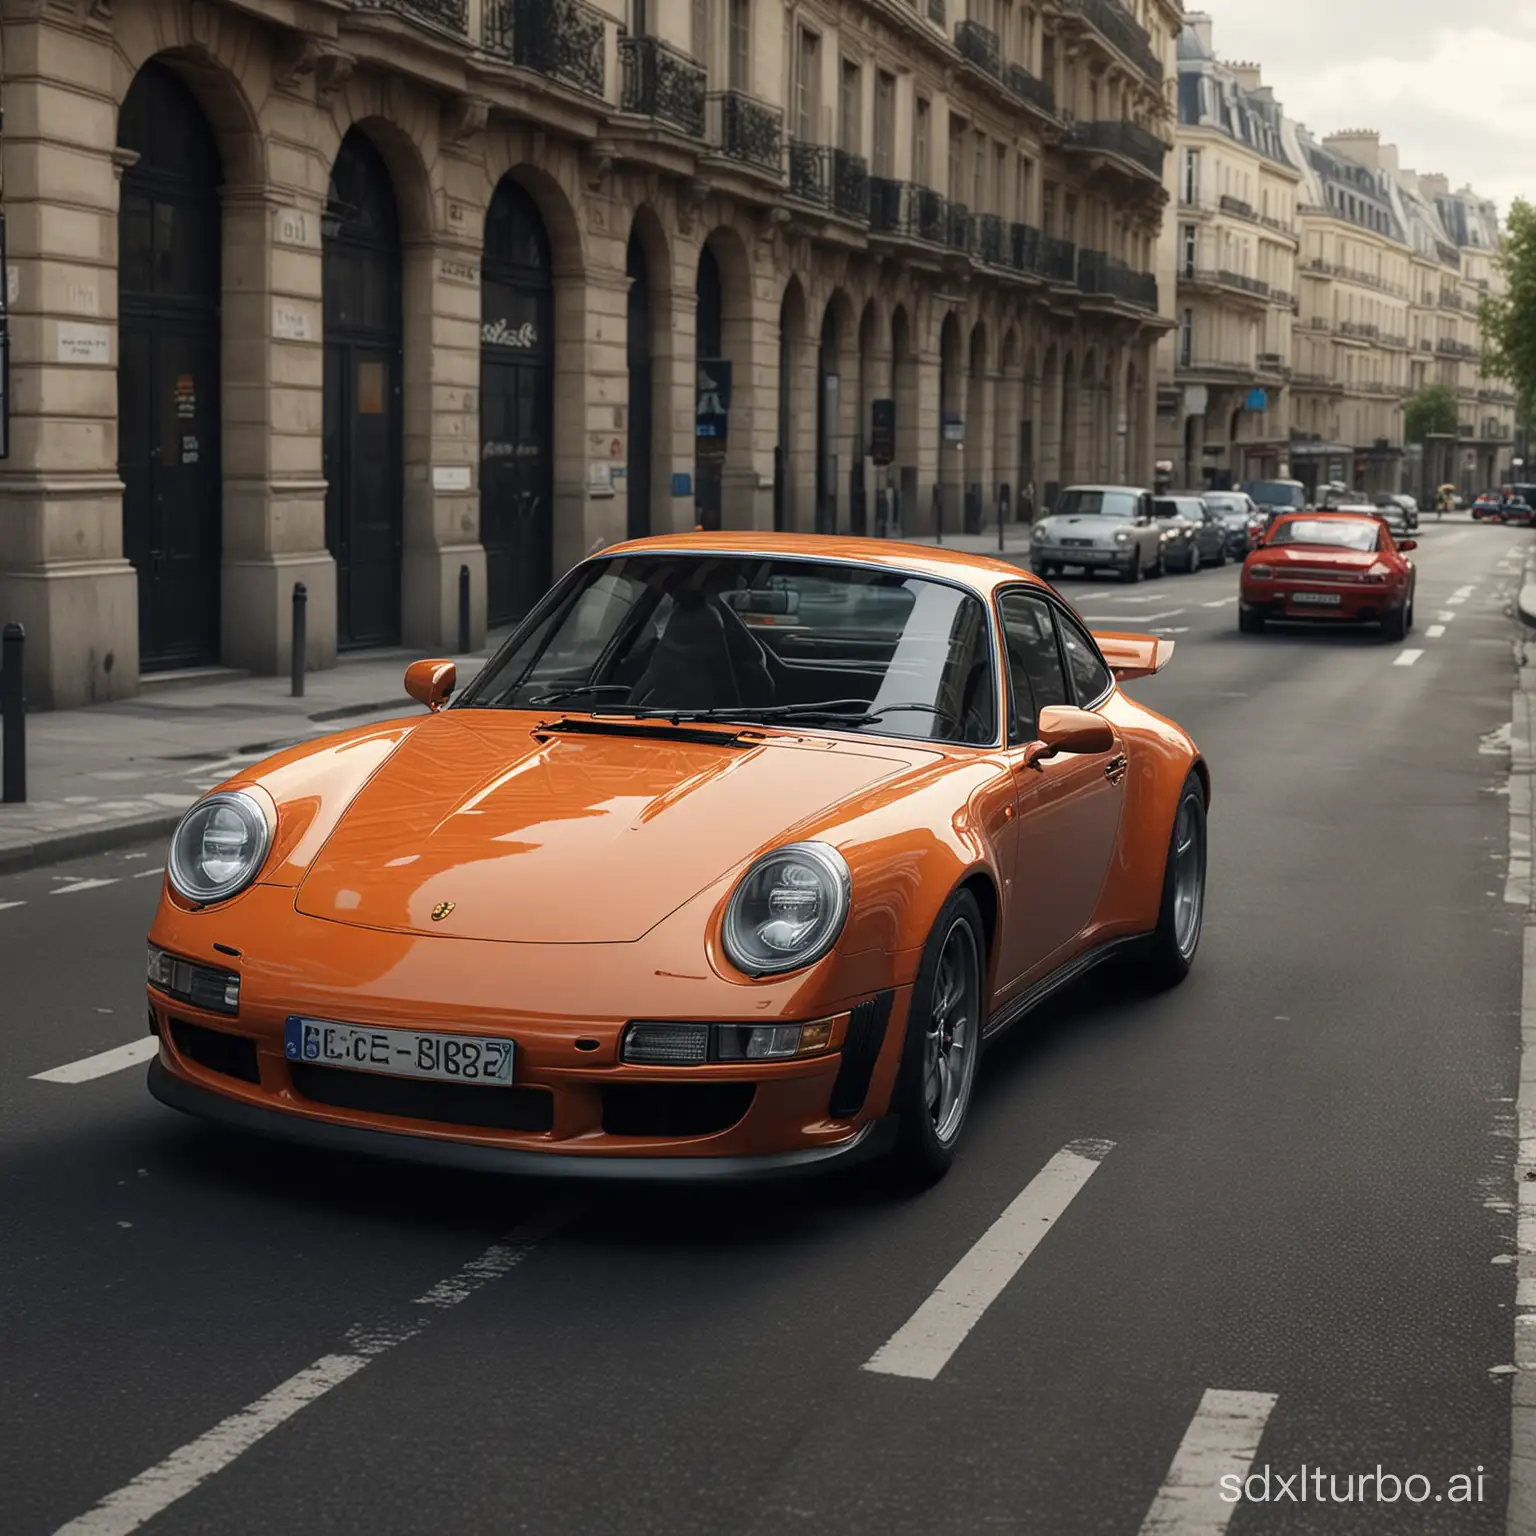 Porsche 911, Paris streets, Cinematic, high quality, highly-detailed, ultra-realistic, photorealistic